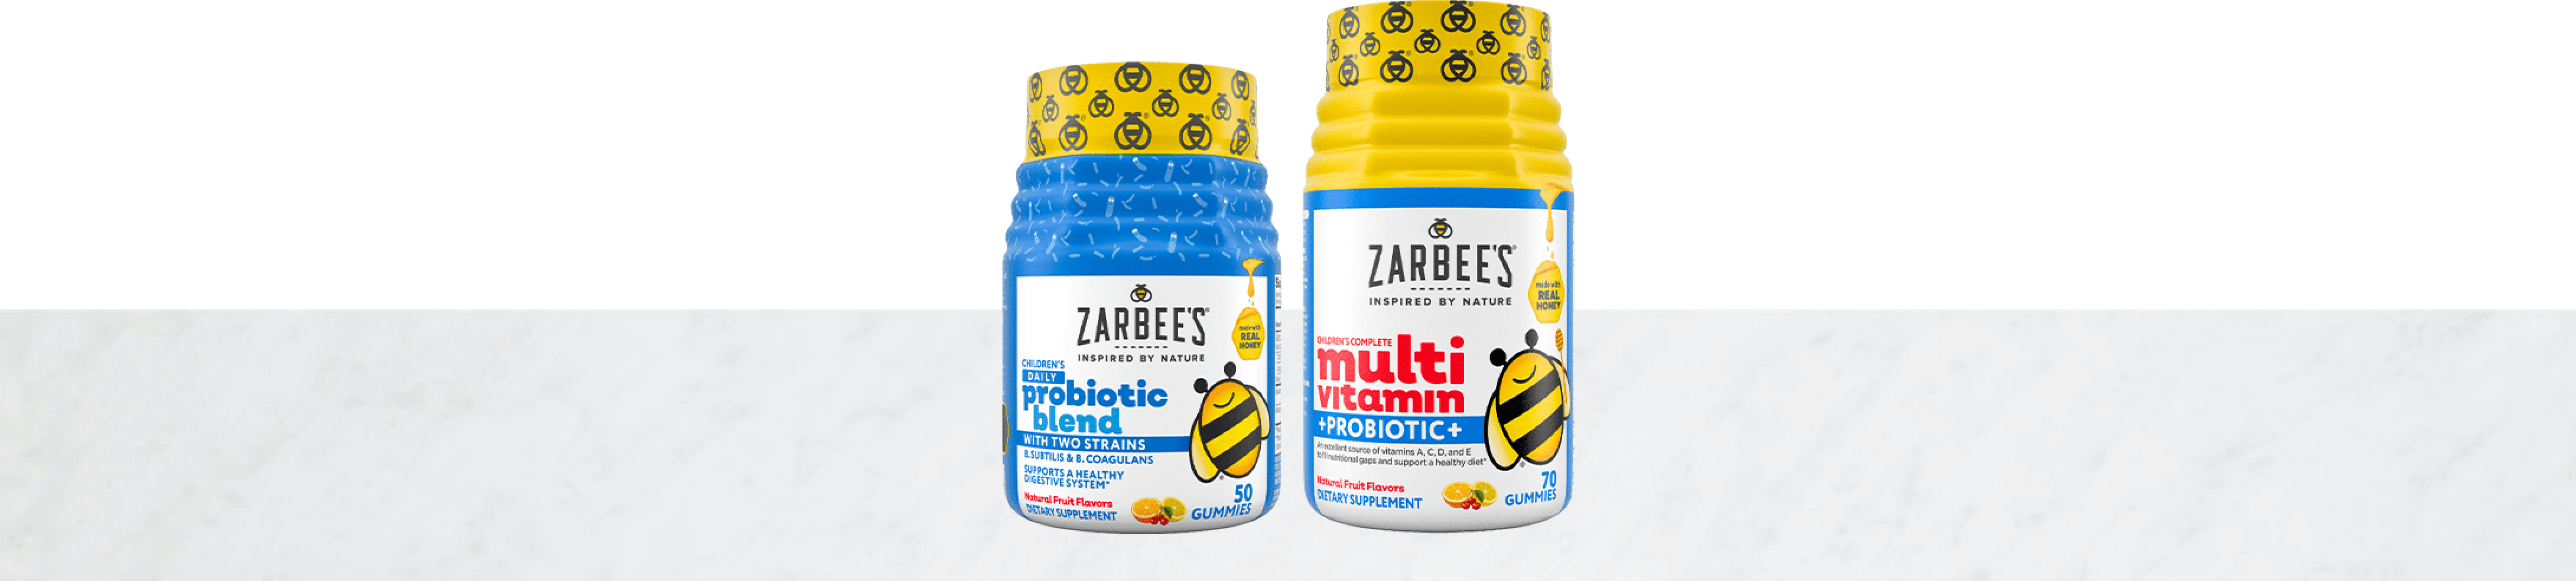 Zarbee’s probiotic product packages